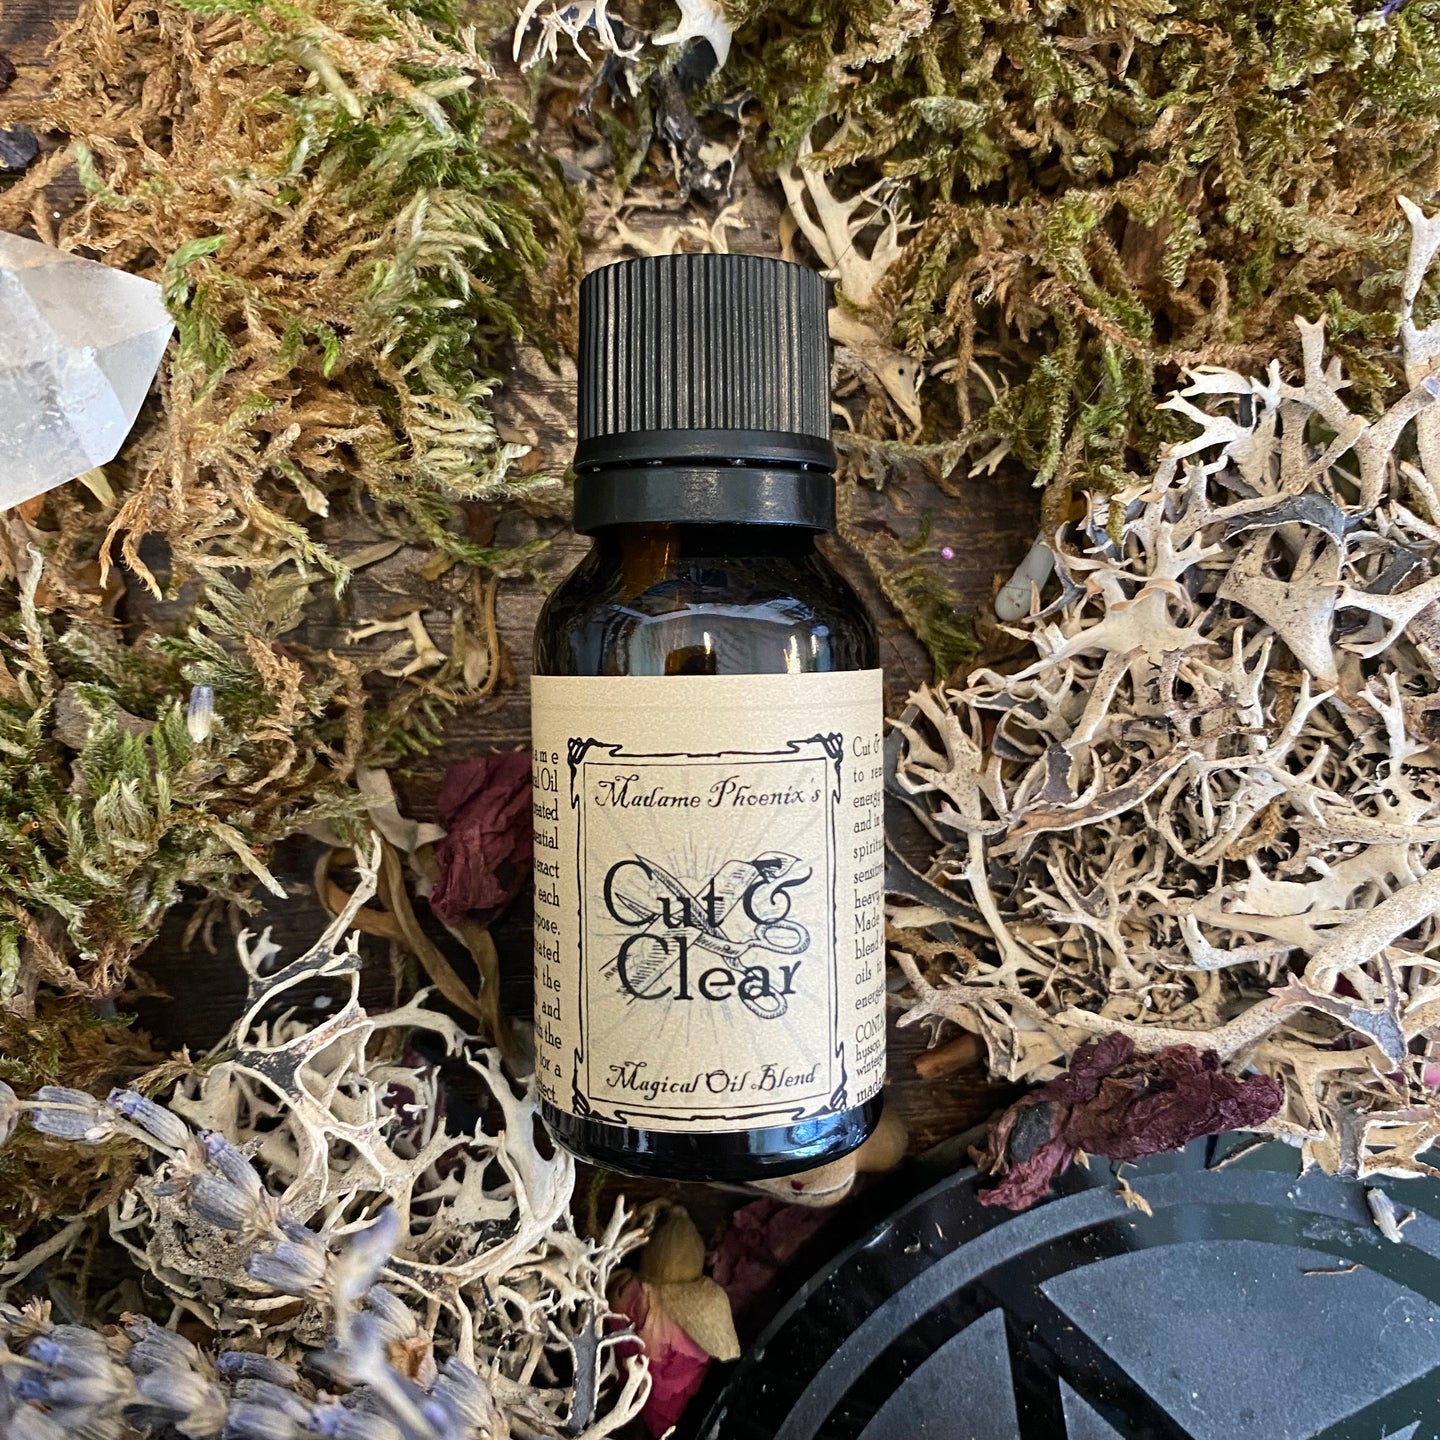 Cut and Clear Ritual Spell Oil